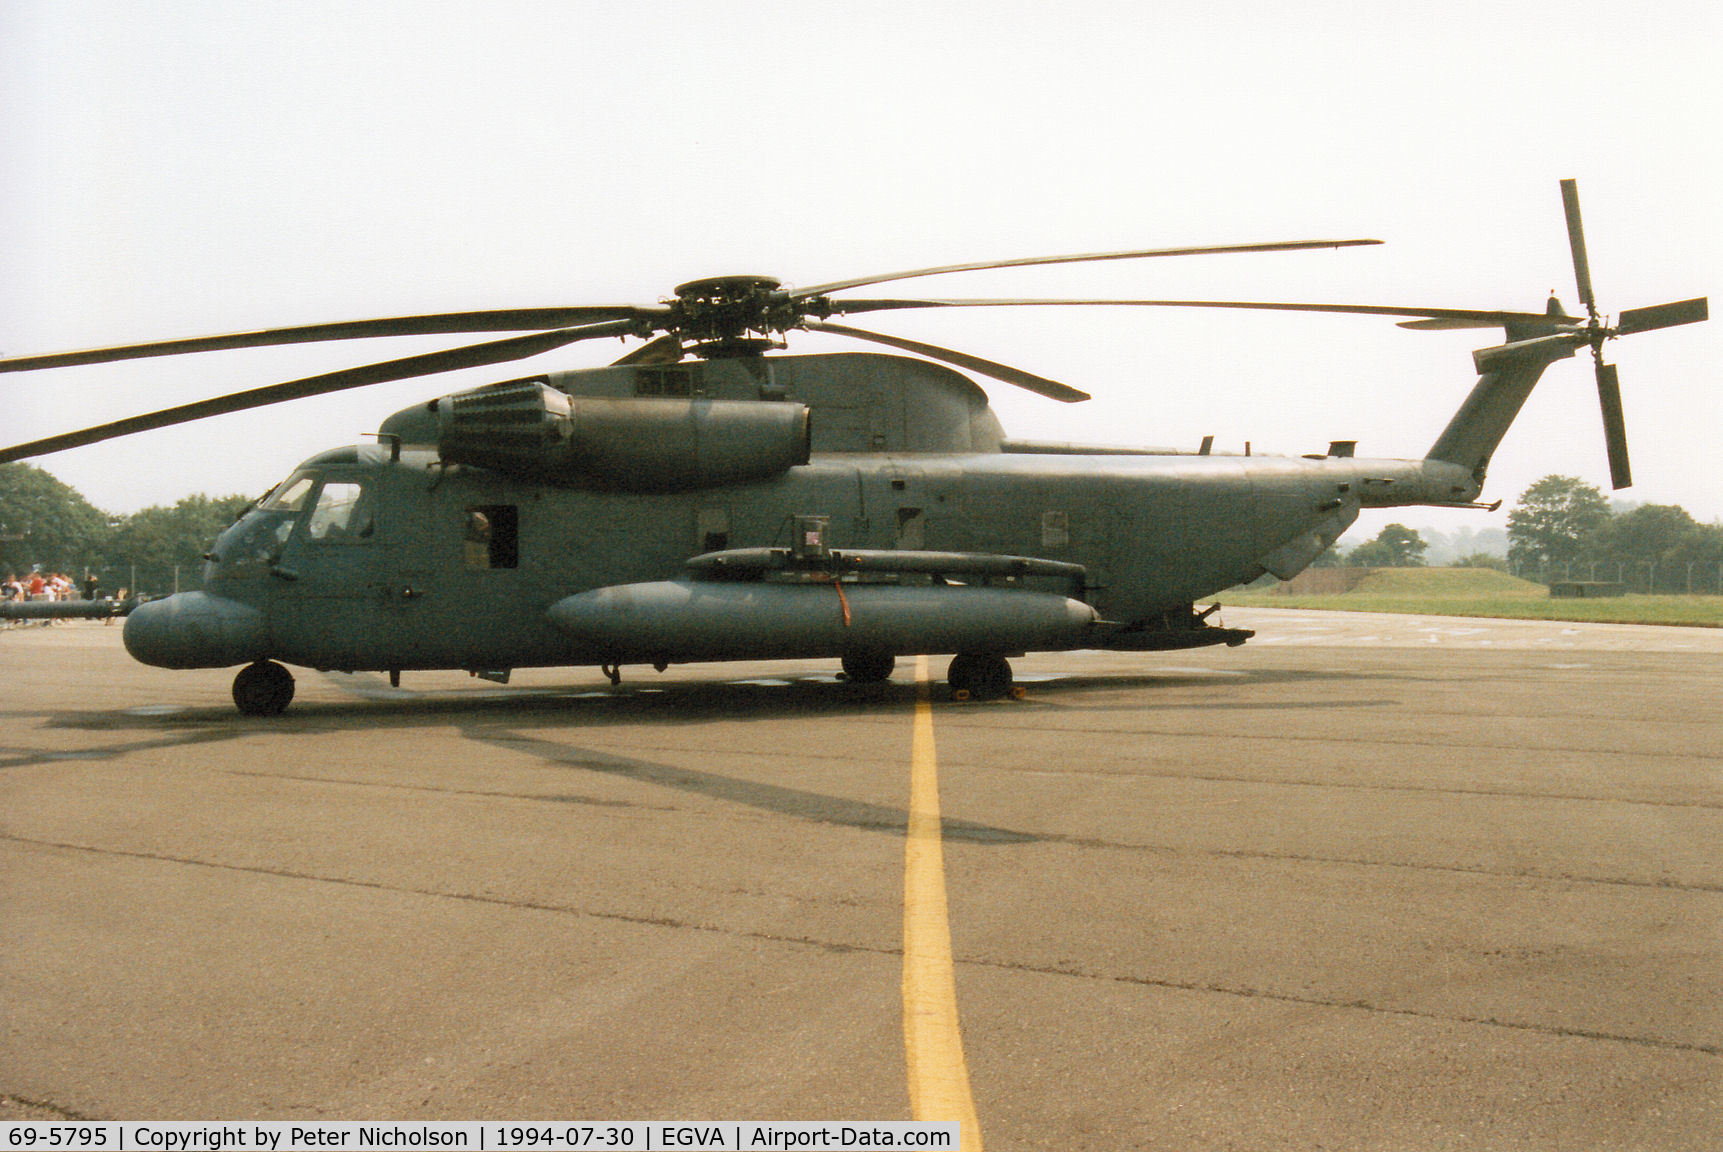 69-5795, 1969 Sikorsky MH-53J Pave Low III C/N 65-250, Another view of the MH-53M Pave Low IV of the 21st Special Operations Squadron at RAF Alconbury on display at the 1994 Intnl Air Tattoo at RAF Fairford.